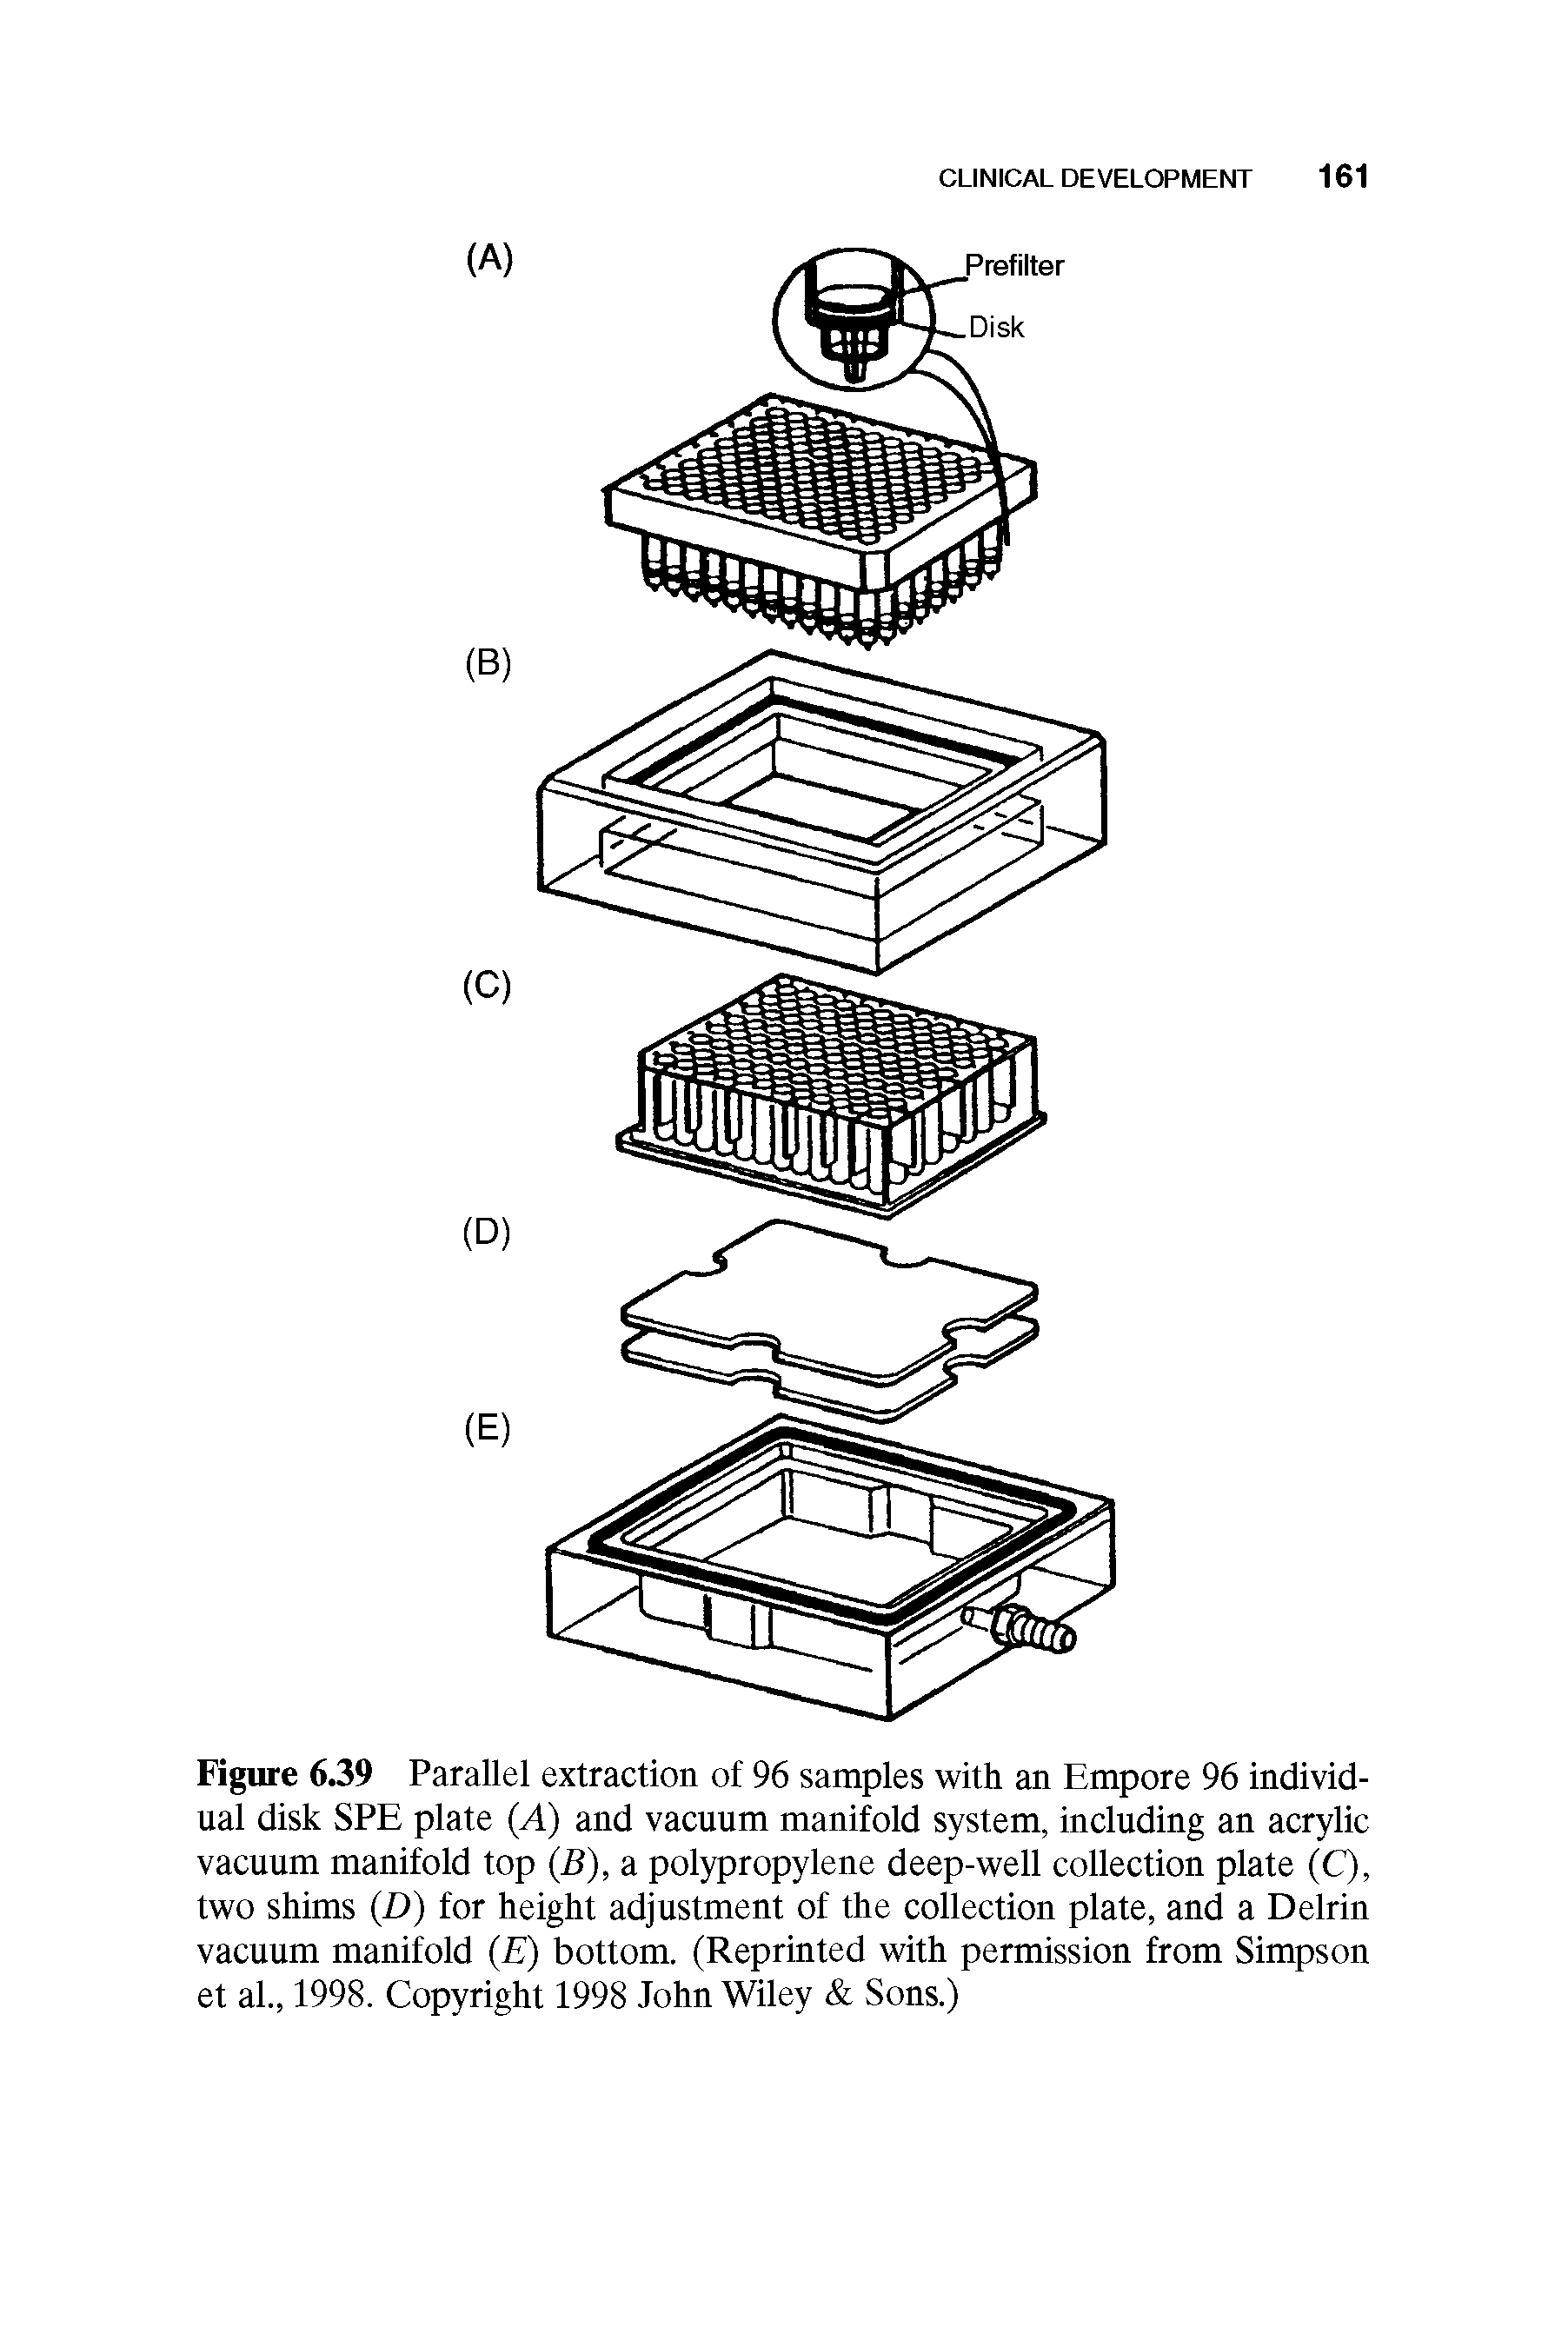 Figure 6.39 Parallel extraction of 96 samples with an Empore 96 individual disk SPE plate (A) and vacuum manifold system, including an acrylic vacuum manifold top (.B), a polypropylene deep-well collection plate (C), two shims (D) for height adjustment of the collection plate, and a Delrin vacuum manifold (E) bottom. (Reprinted with permission from Simpson et al., 1998. Copyright 1998 John Wiley Sons.)...